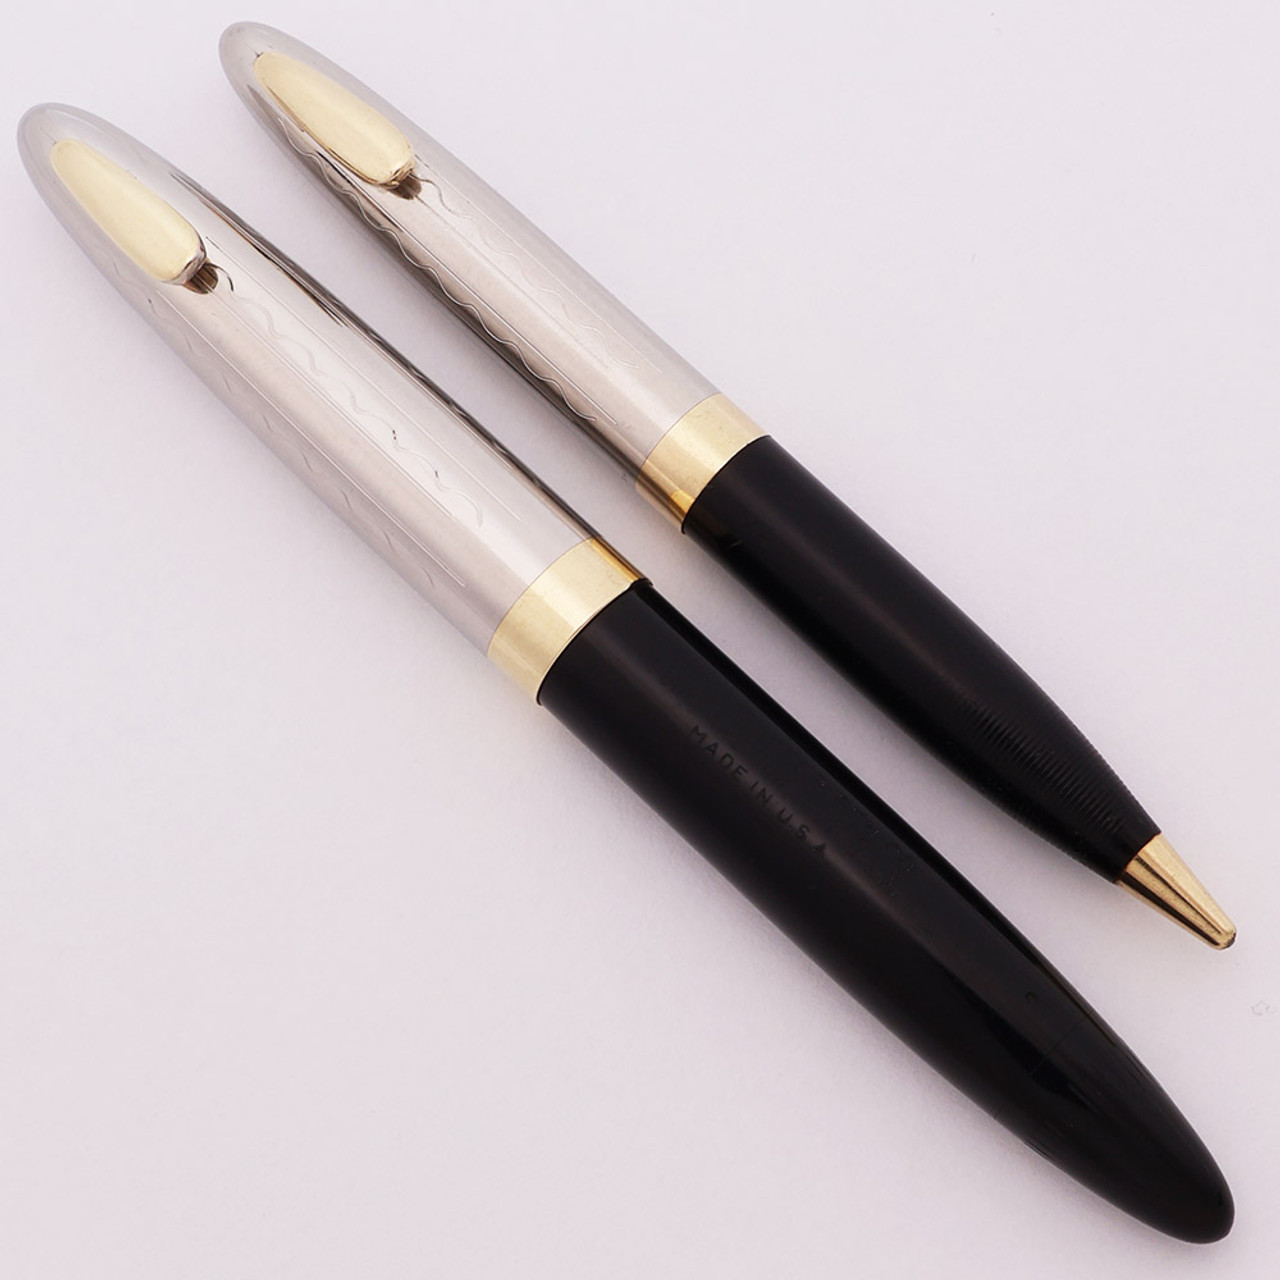 Sheaffer Tuckaway Sentinel Fountain Pen & Pencil Set (1949) - Black w/Stainless Squiggly Line Pattern Steel Caps and GT, Touchdown, Fine 14k Triumph Nib (Excellent +, Restored)